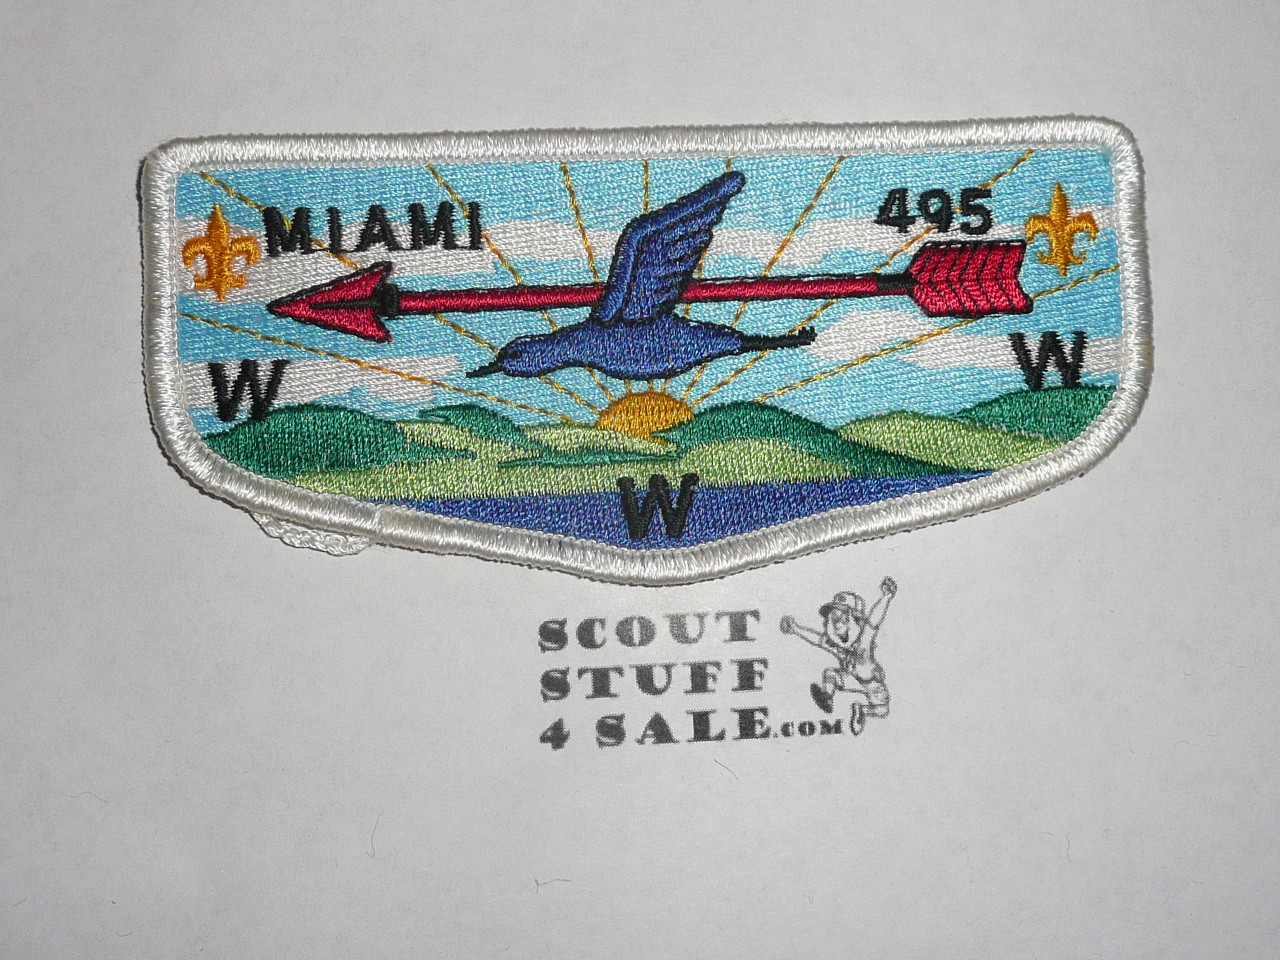 Order of the Arrow Lodge #495 Miami s13 Flap Patch